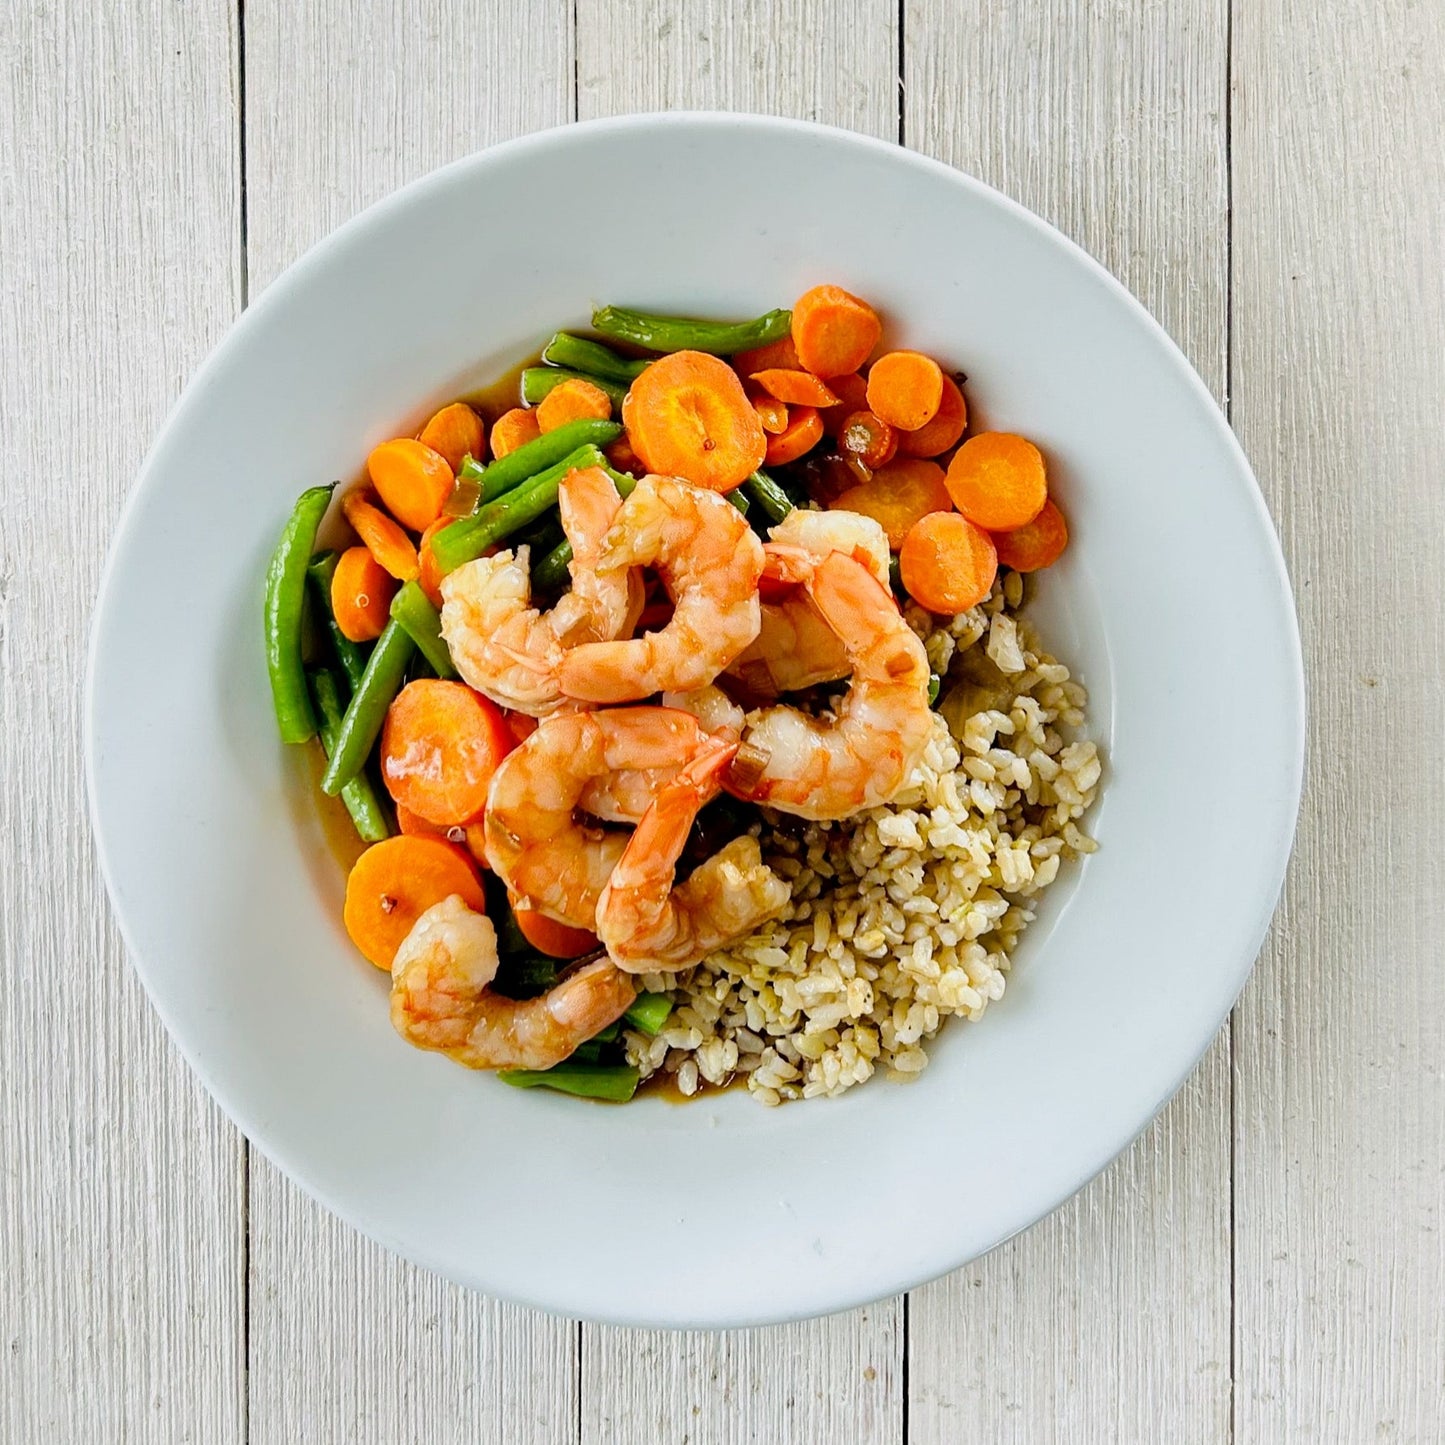 Teriyaki Shrimp over Brown Rice with Green Beans and Roasted Carrots (GF)